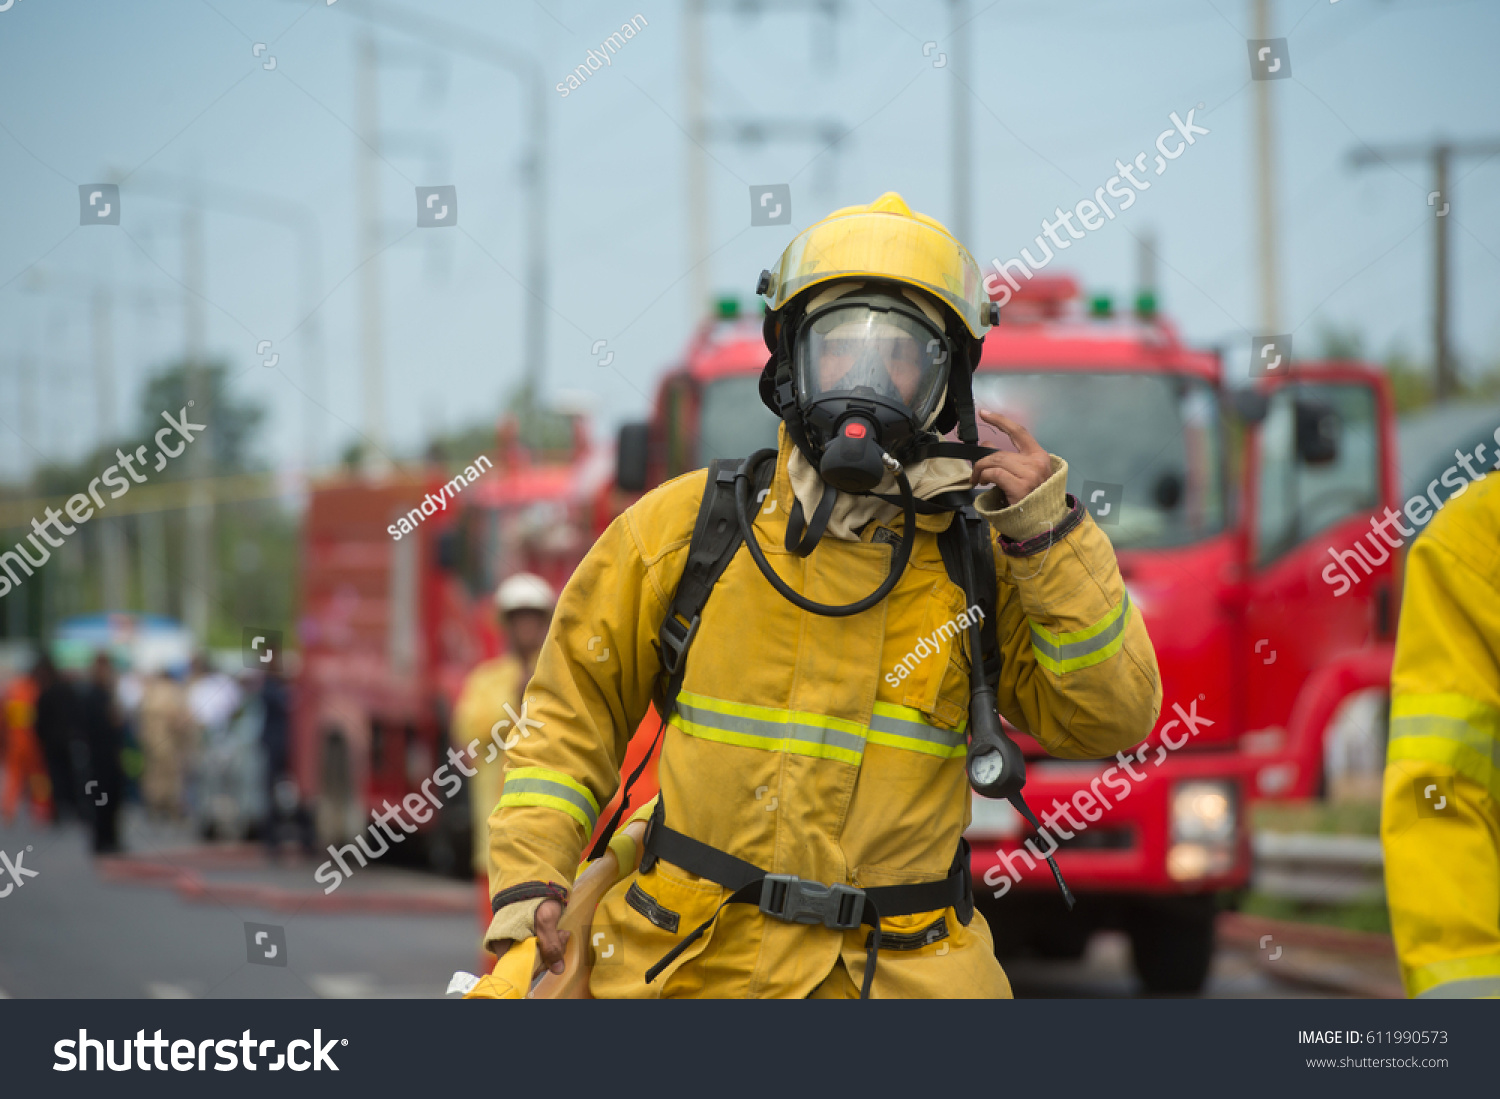 firefighters at work in oxygen suit #611990573